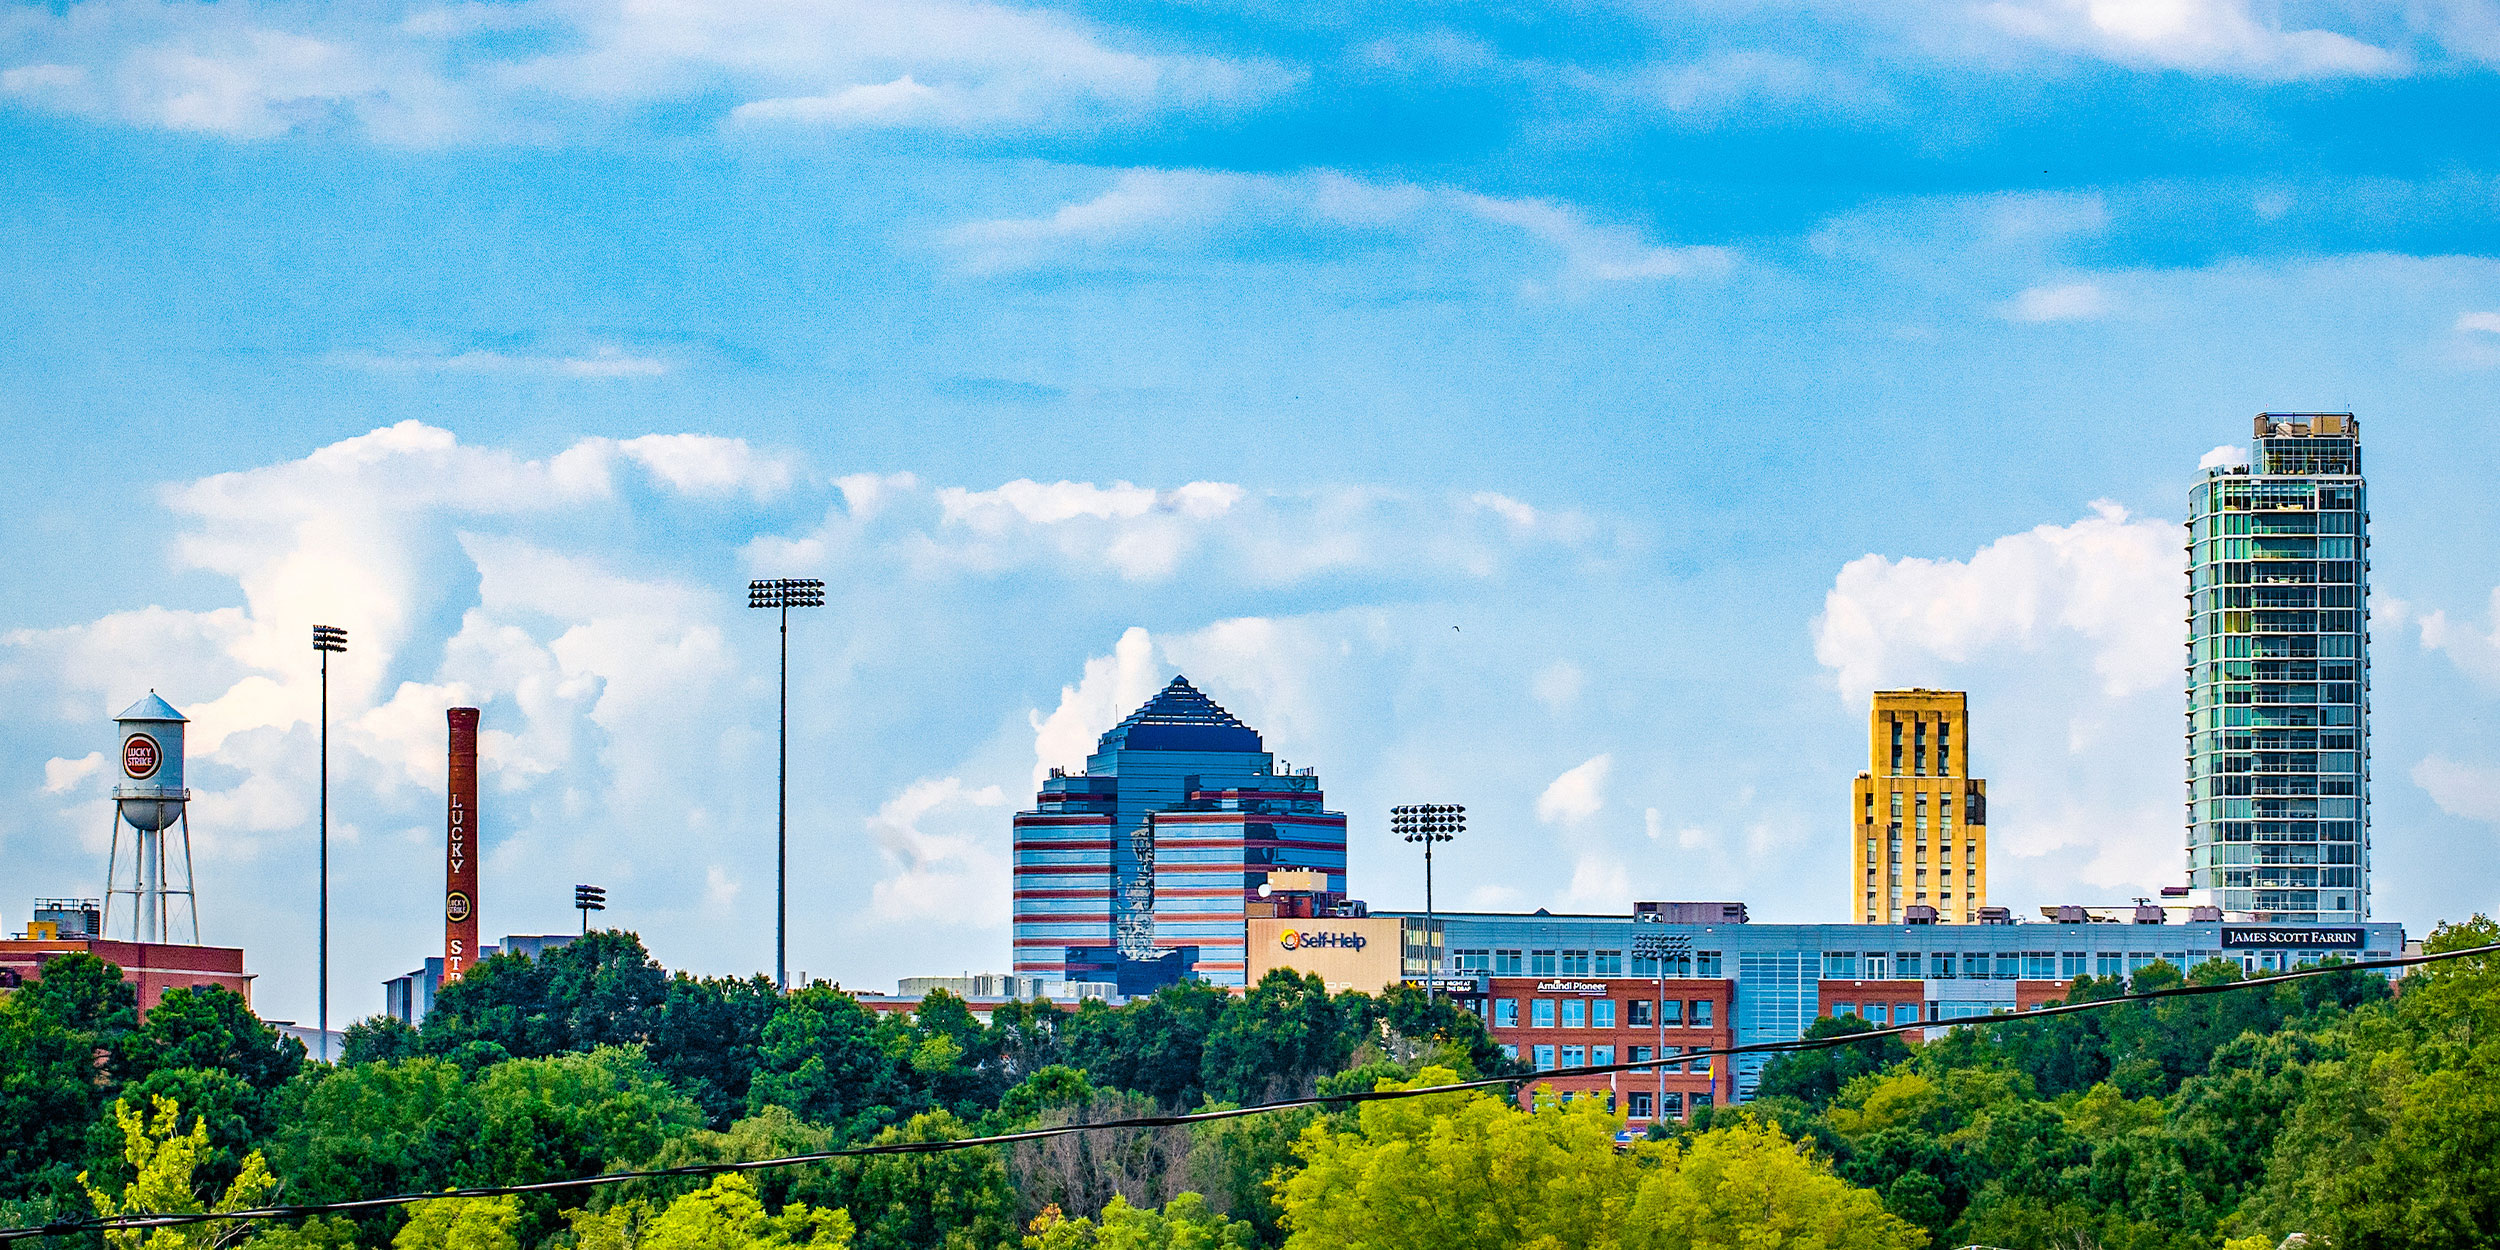 The downtown Durham skyline, with a few tall buildings, a Lucky Strike water tower, and tall industrial lights with lush green spaces in Wake County